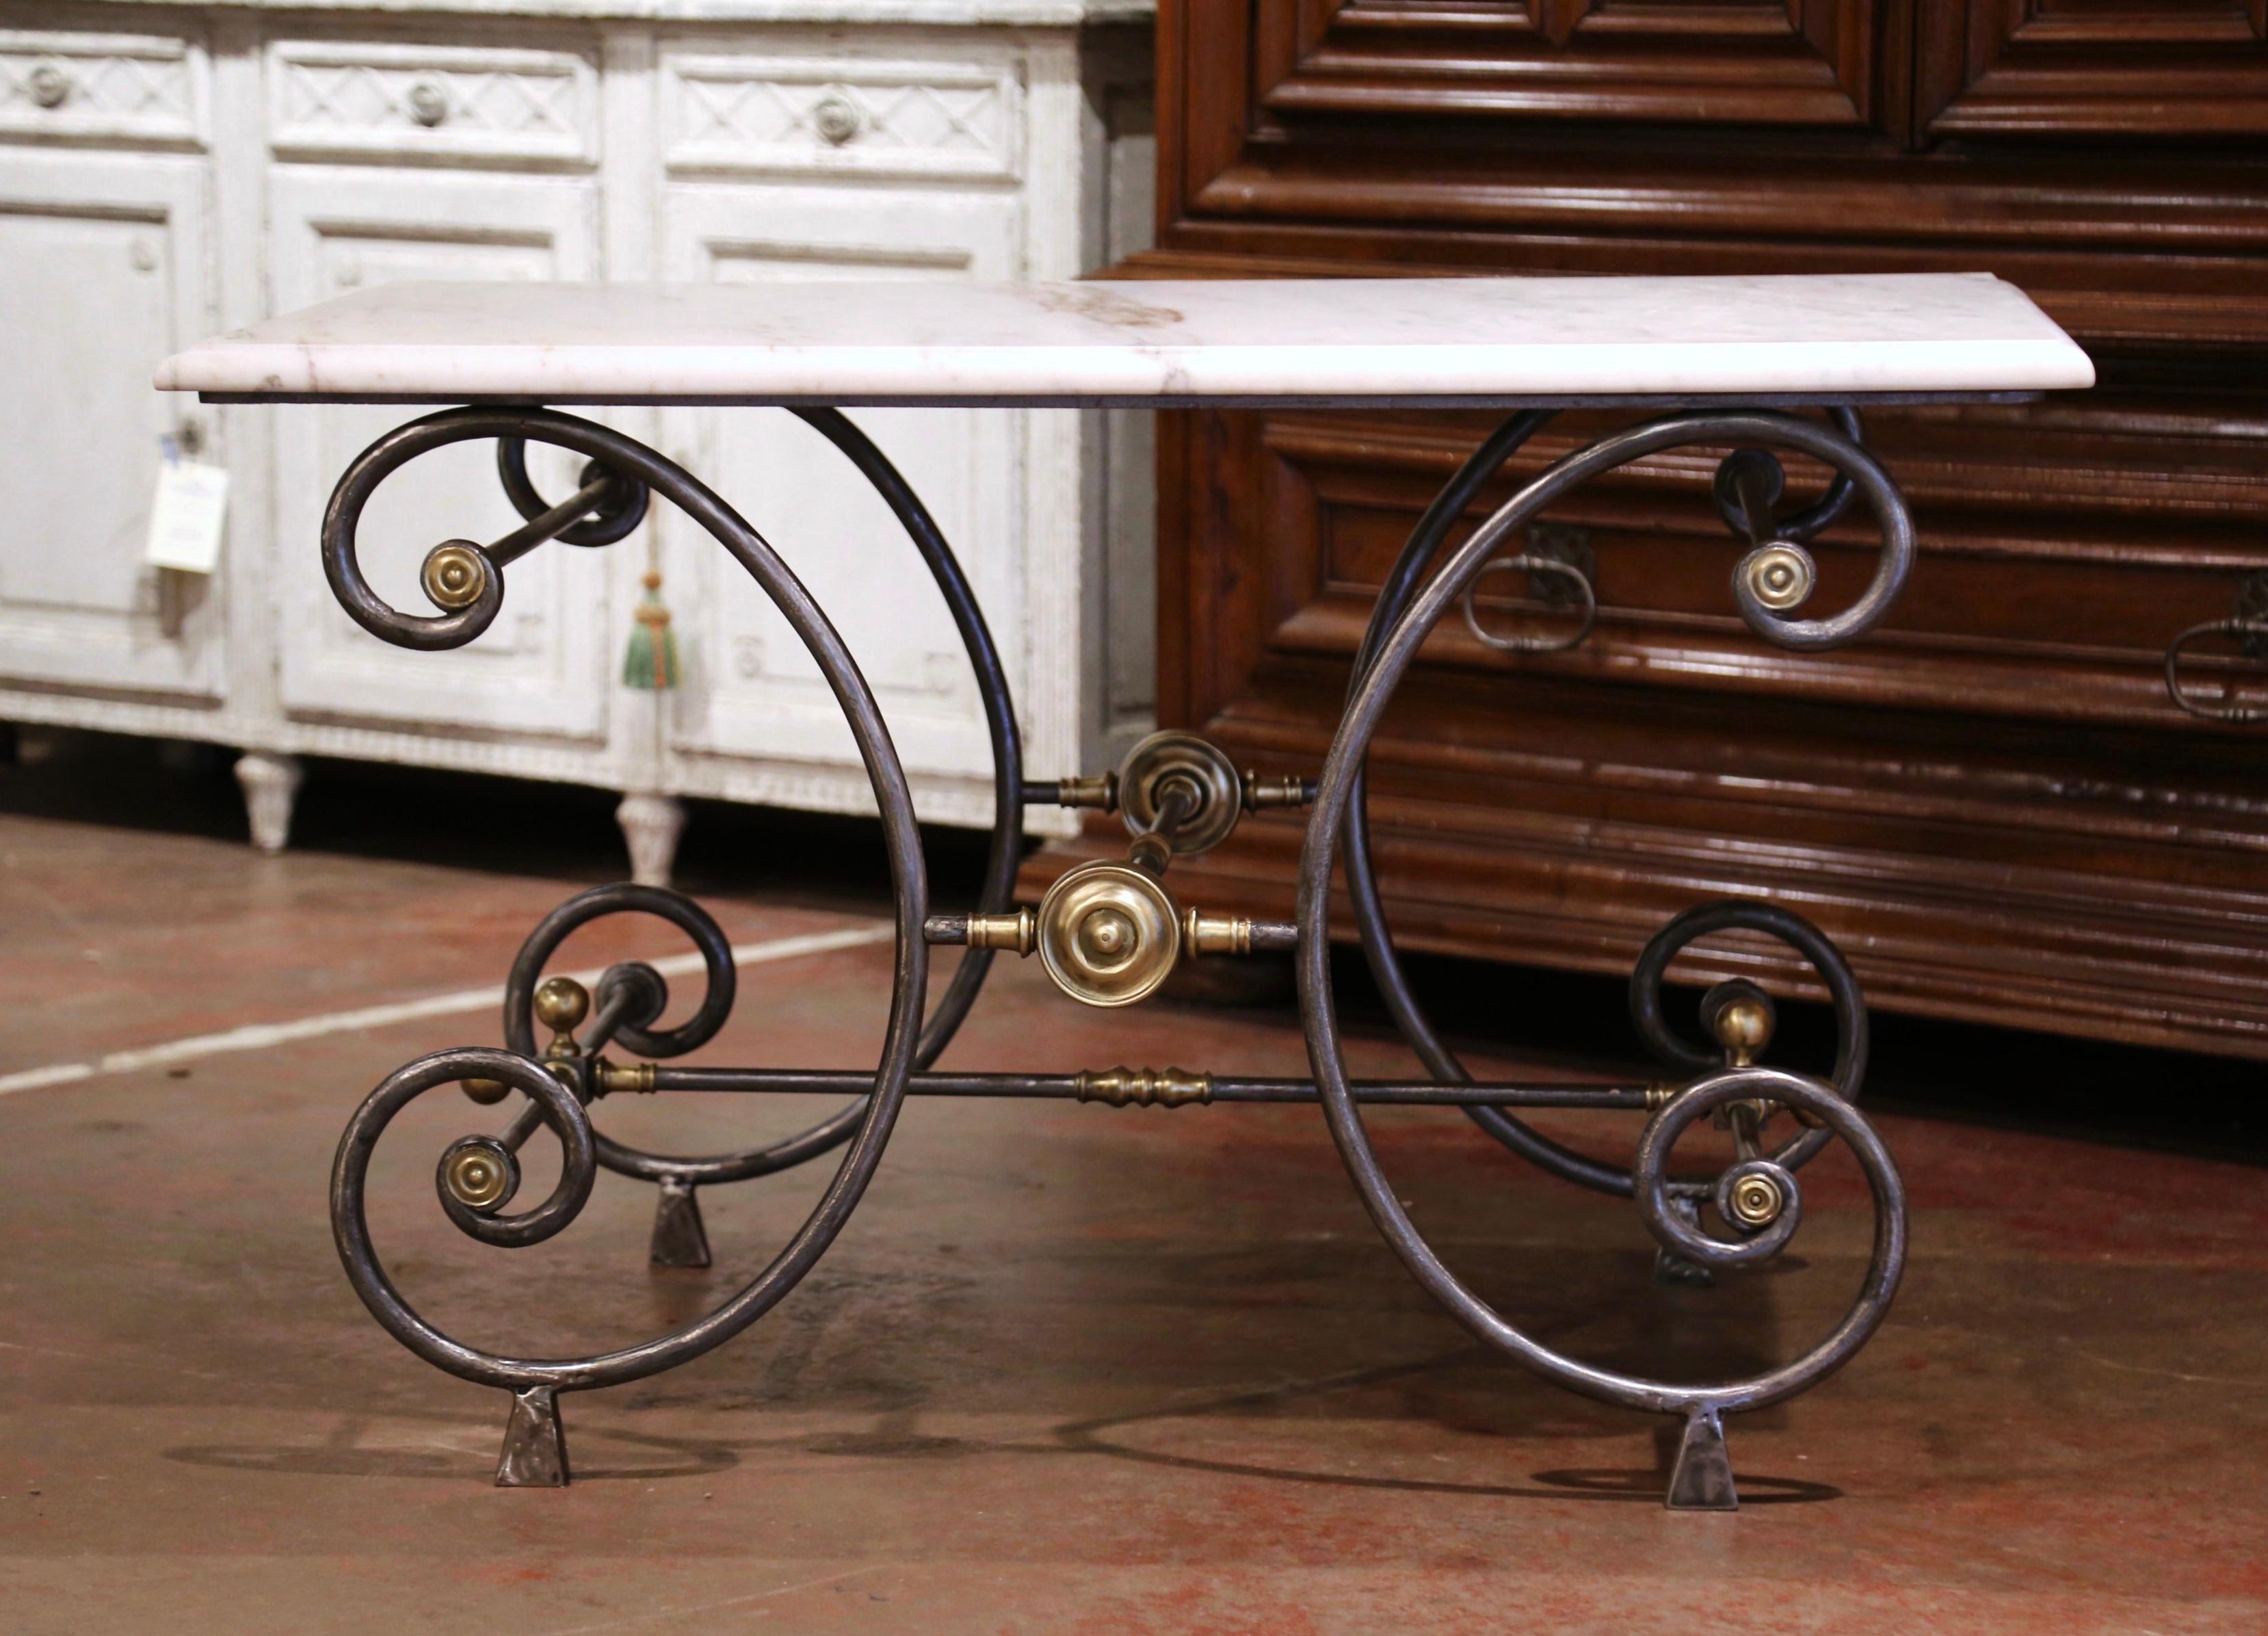 Rectangular in shape, the antique butcher table (or pastry table) would add the ideal amount of surface space to any kitchen. Crafted in France circa 1880, the table features intricate metal work and beautiful scrolled legs, decorated with round